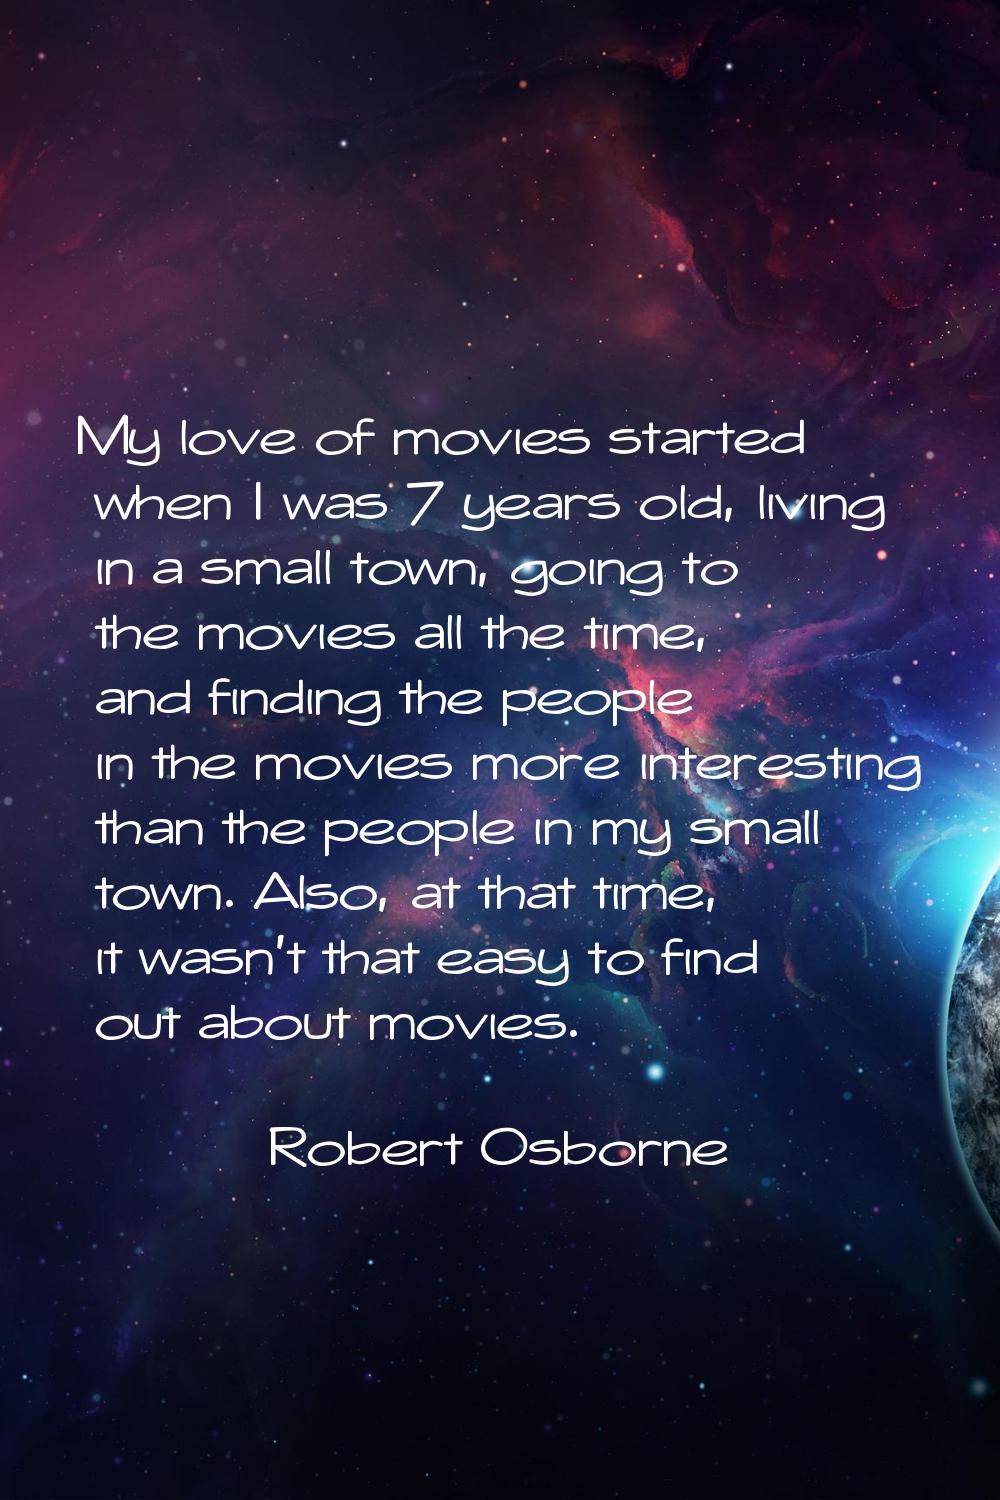 My love of movies started when I was 7 years old, living in a small town, going to the movies all t